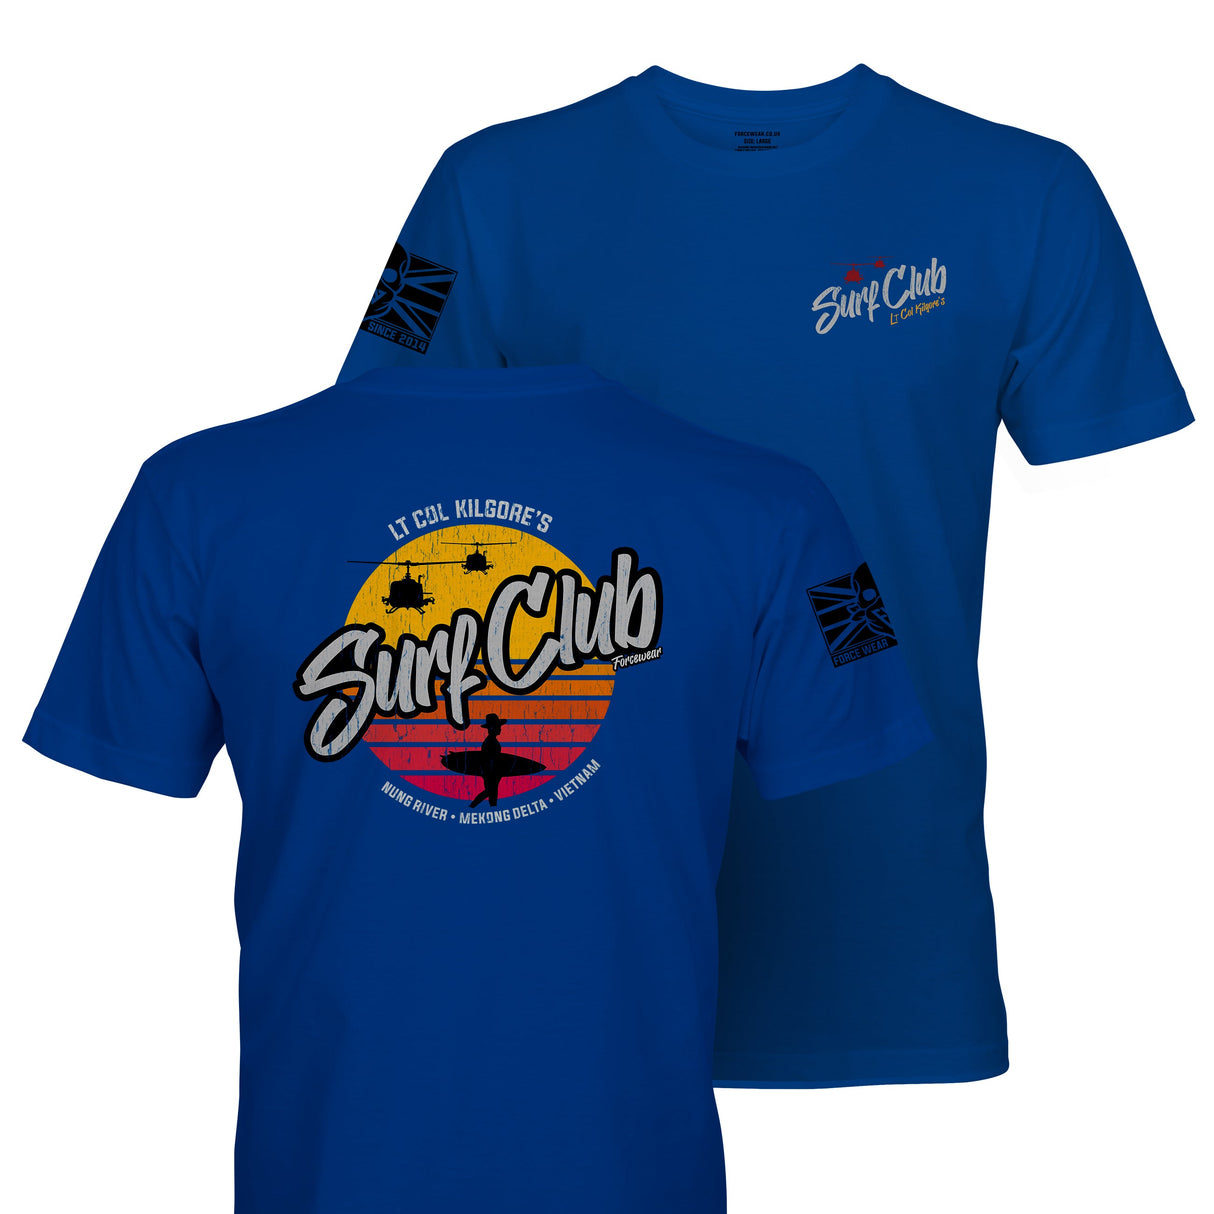 SURF CLUB TAG AND BACK - Force Wear HQ - T-SHIRTS